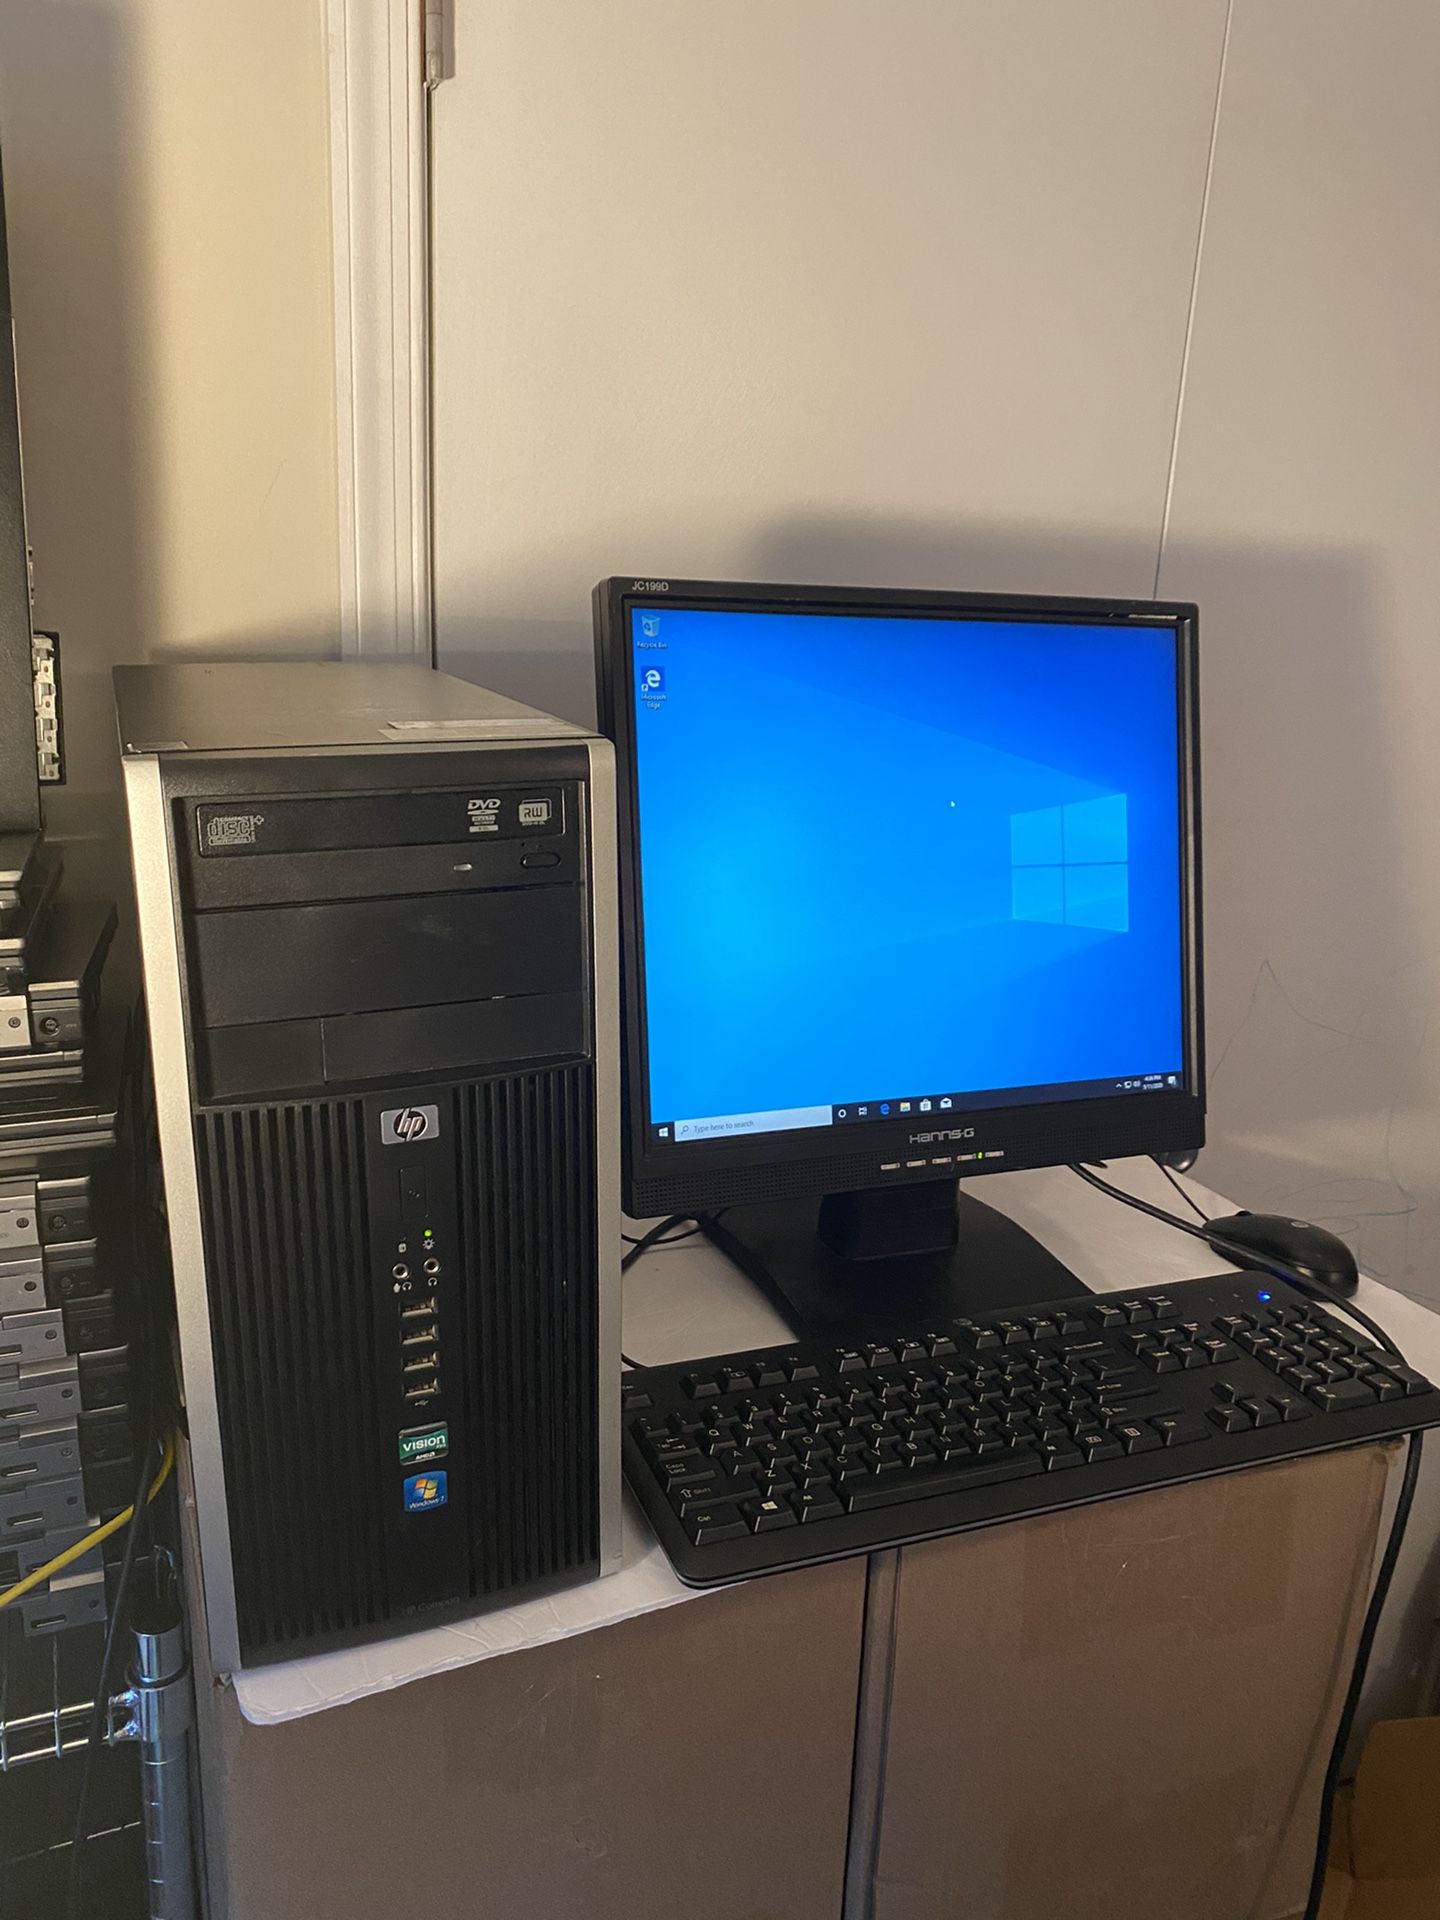 Hp Compaq Desktop, Hp keyboard and Hp Mouse, monitor ready to use Windows 10 Pro, included and Activated AMD Processor 4gb ram Fast working comput